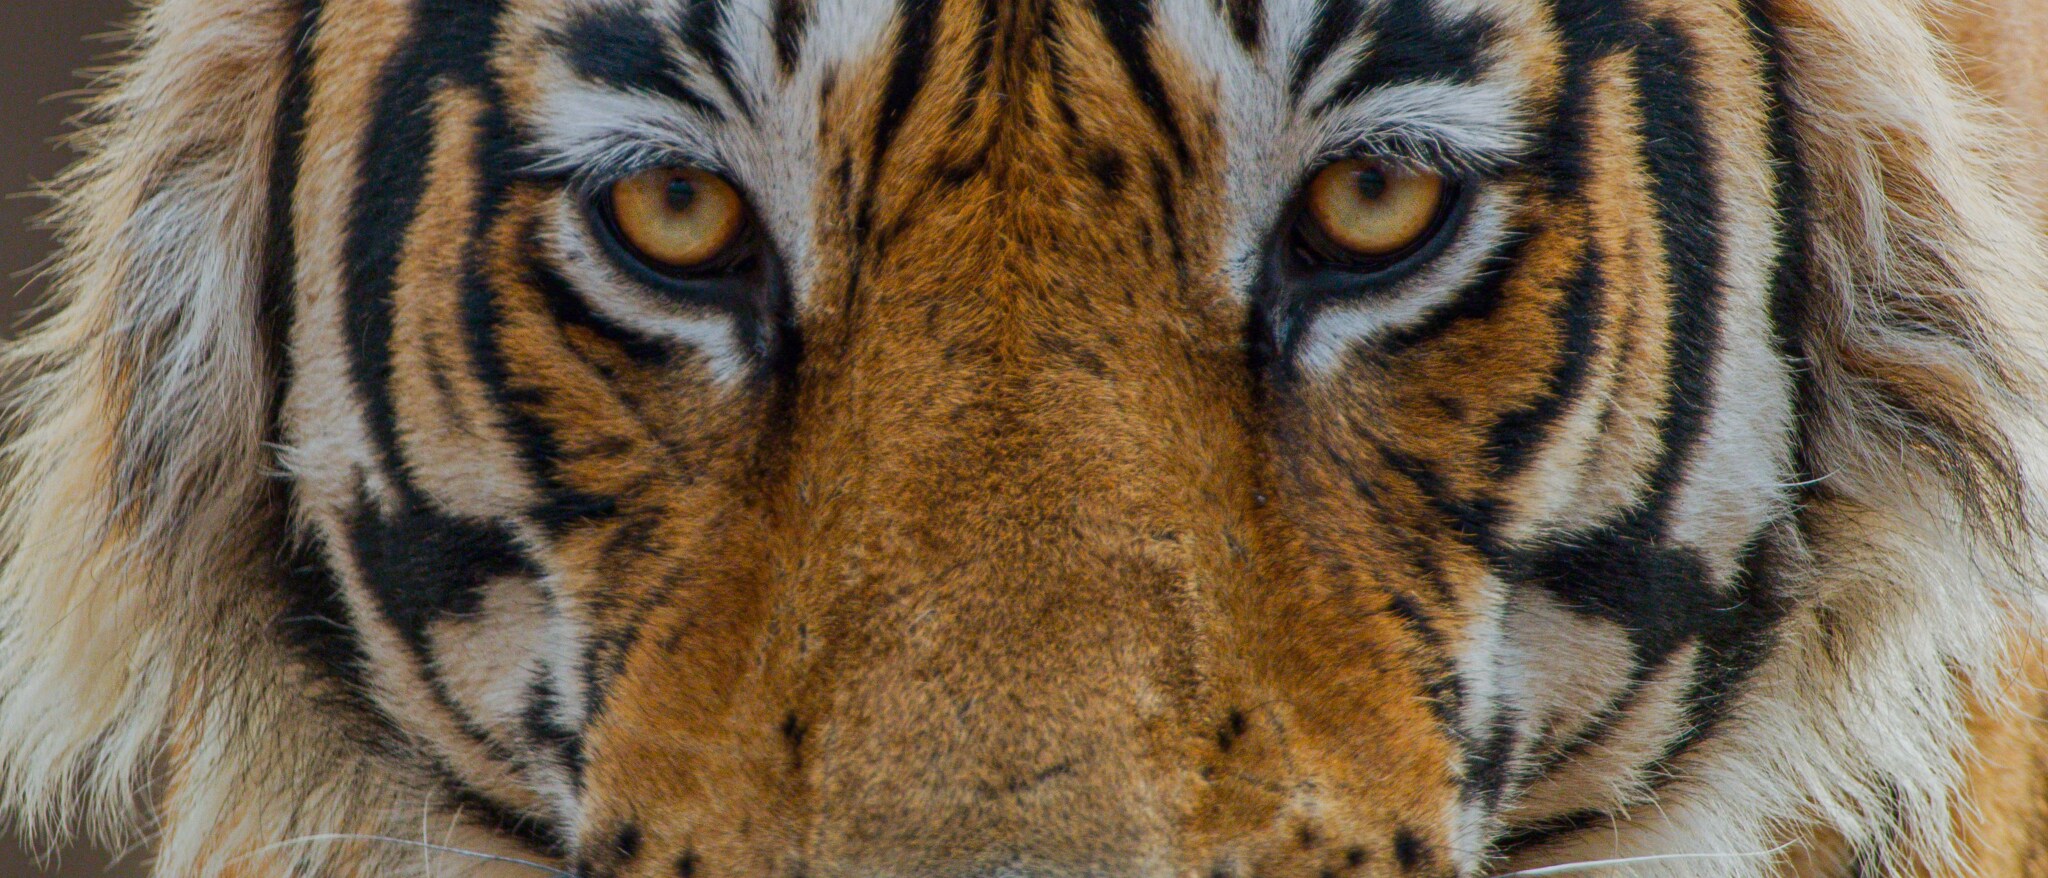 Disneynature: Tiger - Featured Content Banner